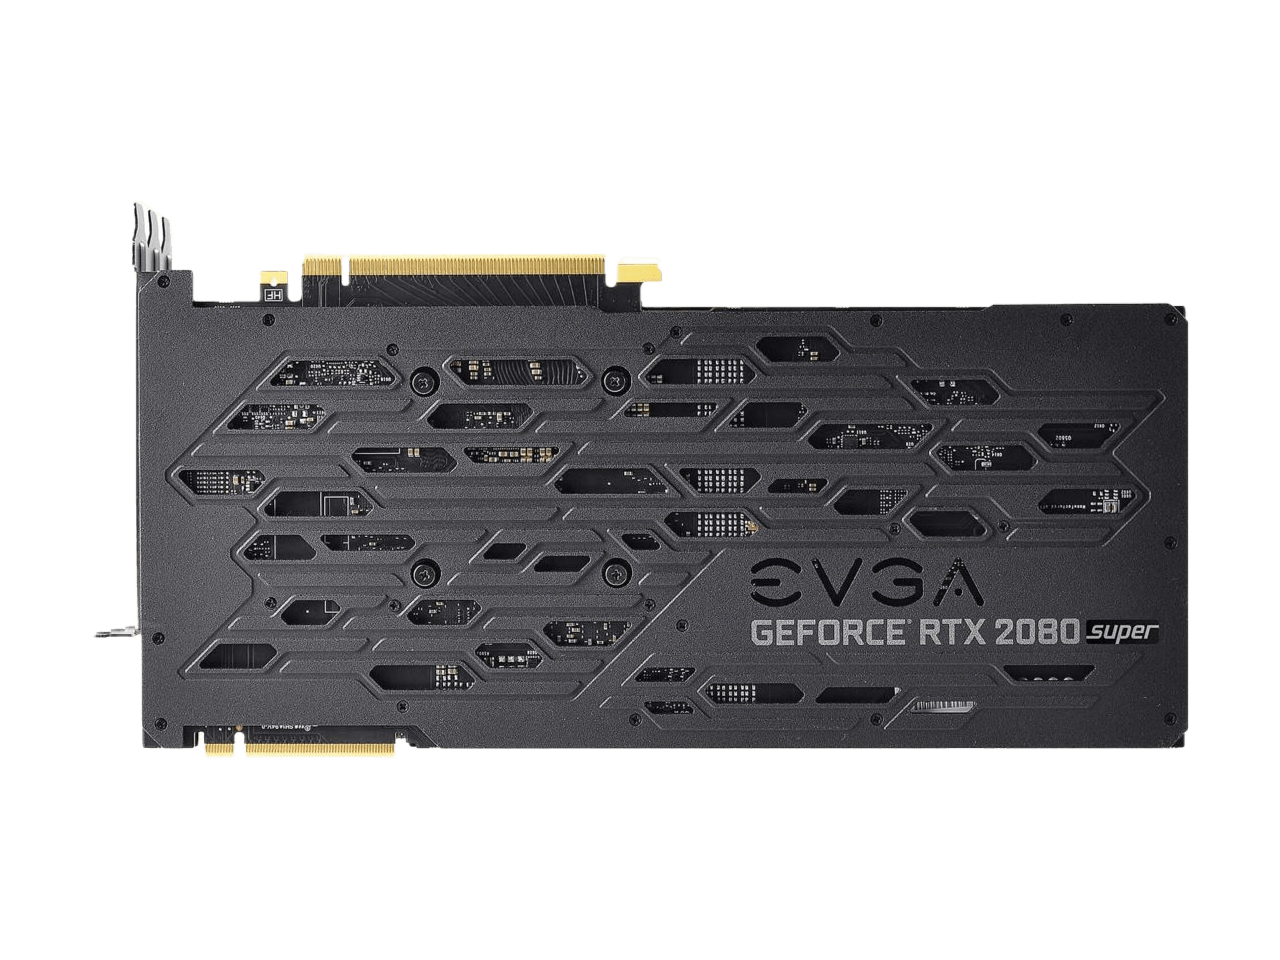 EVGA GeForce RTX 2080 SUPER FTW3 ULTRA GAMING GDDR6 iCX2 Technology RGB LED Metal Backplate Video Graphics Card 08G-P4-3287-KR